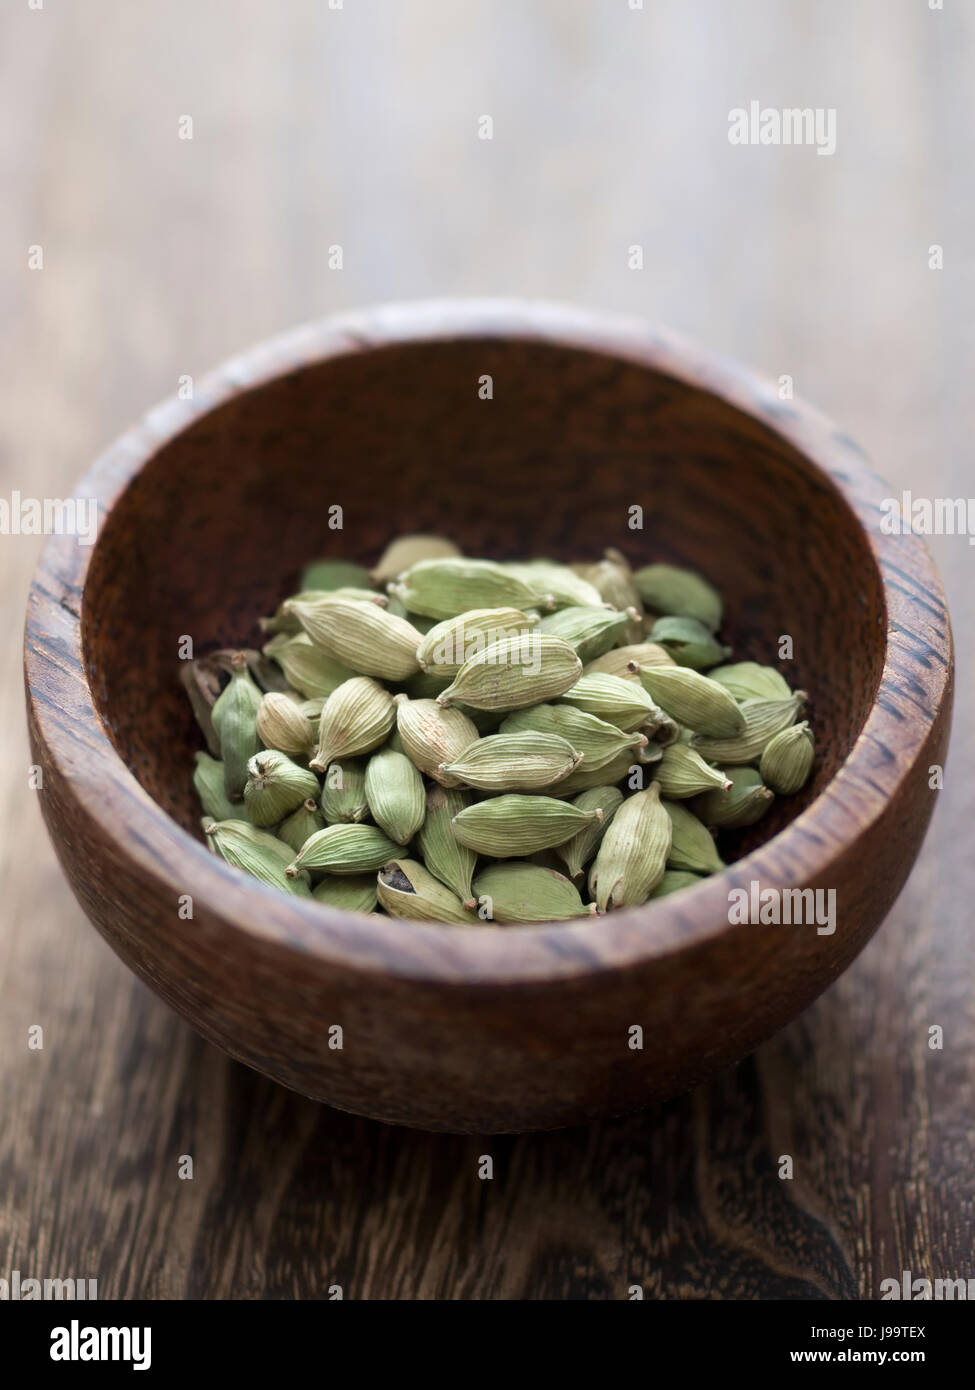 condiment, aromatic, spices, flavor, indian, green, food, aliment, spice, Stock Photo